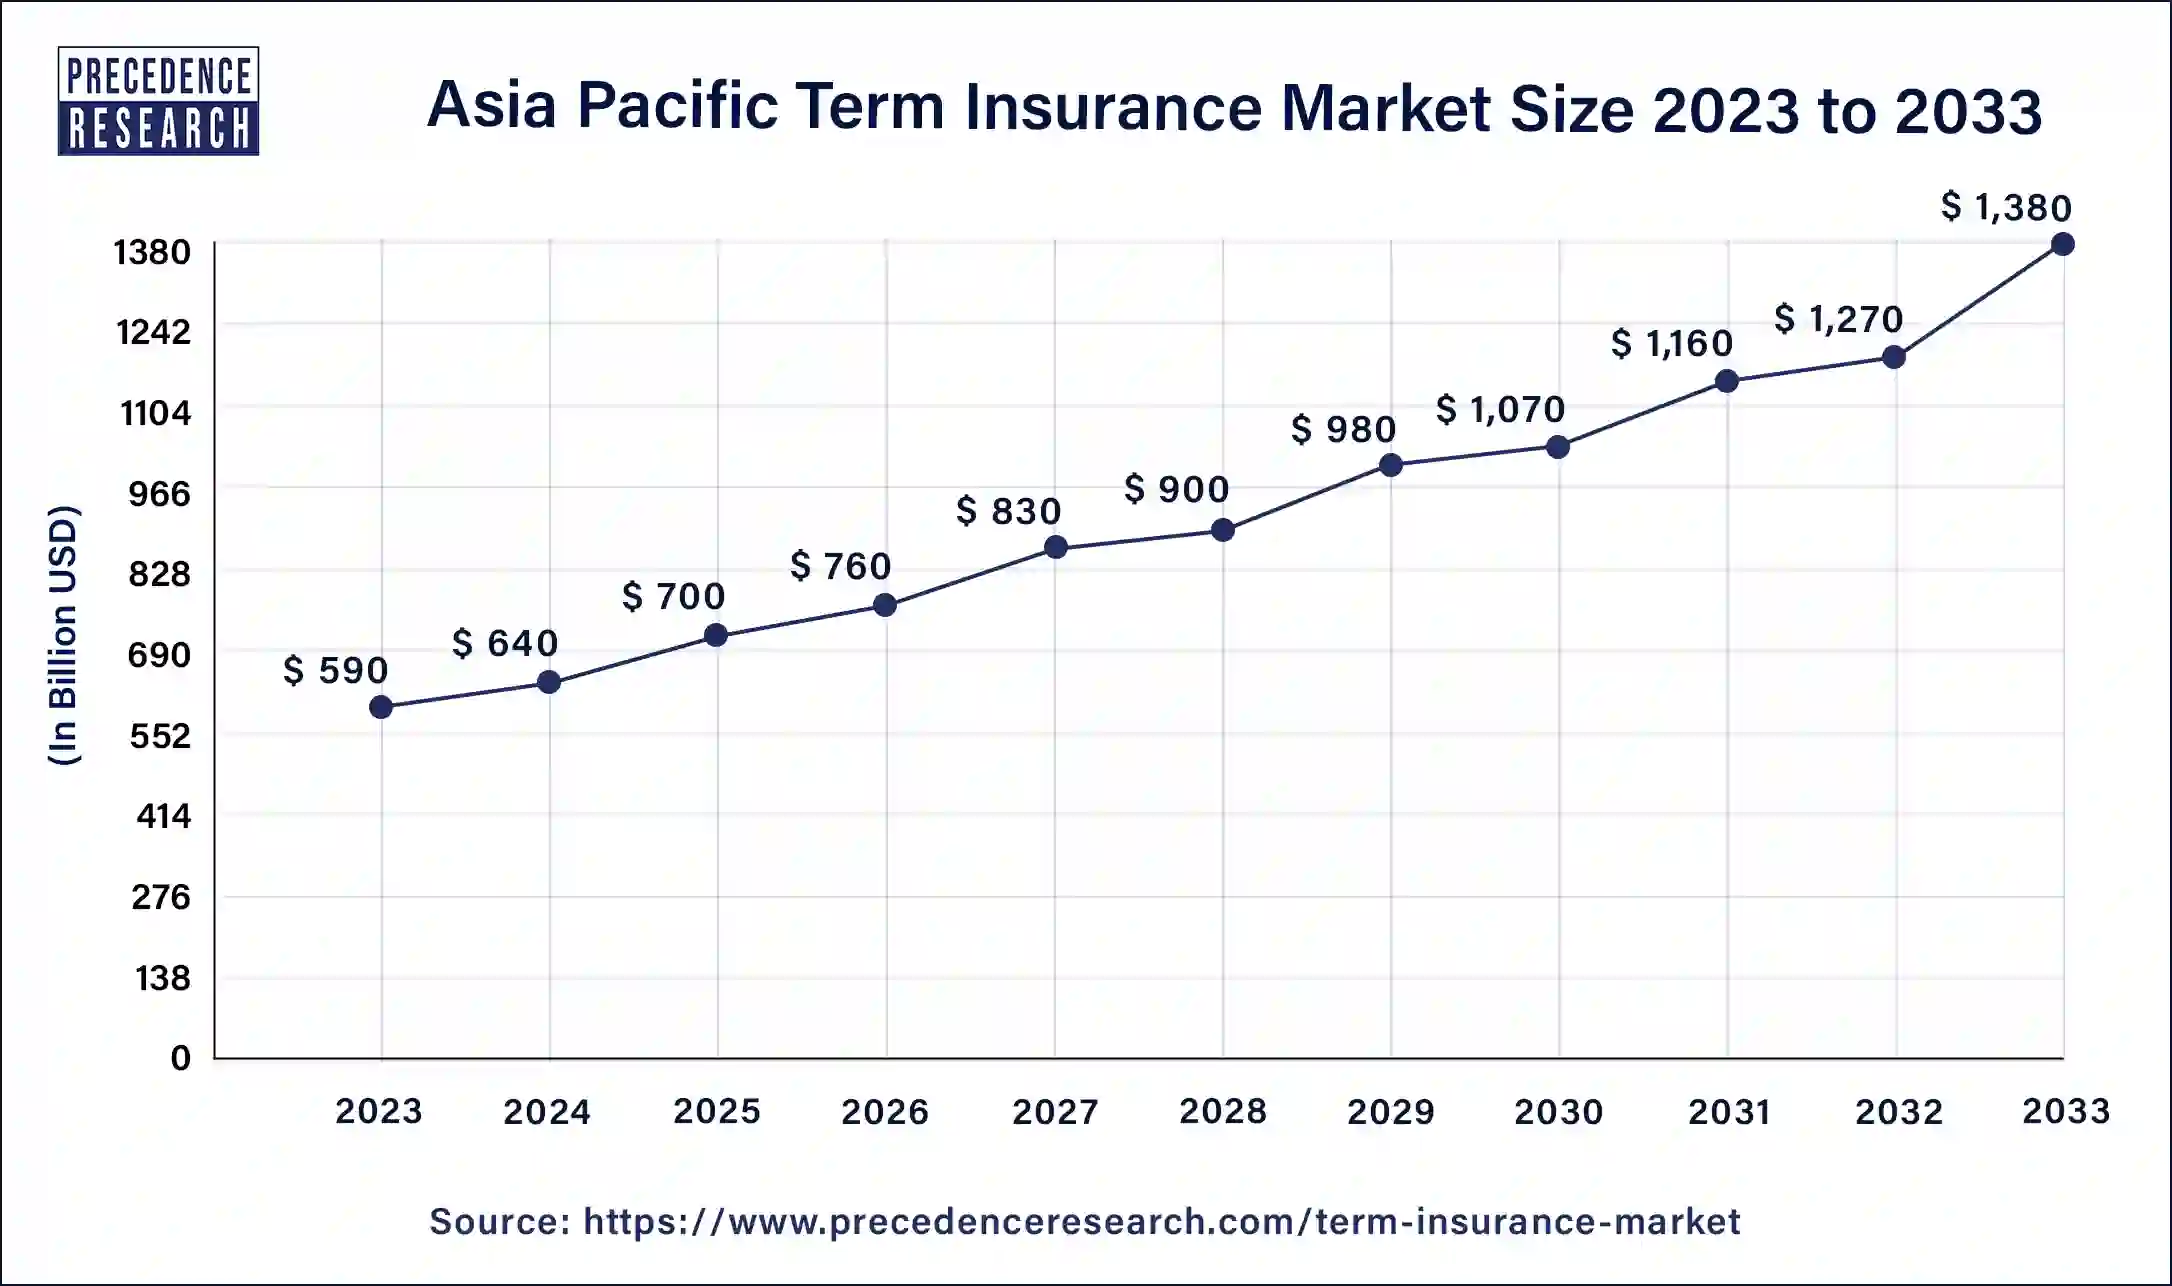 Asia Pacific Term Insurance Market Size 2024 to 2033